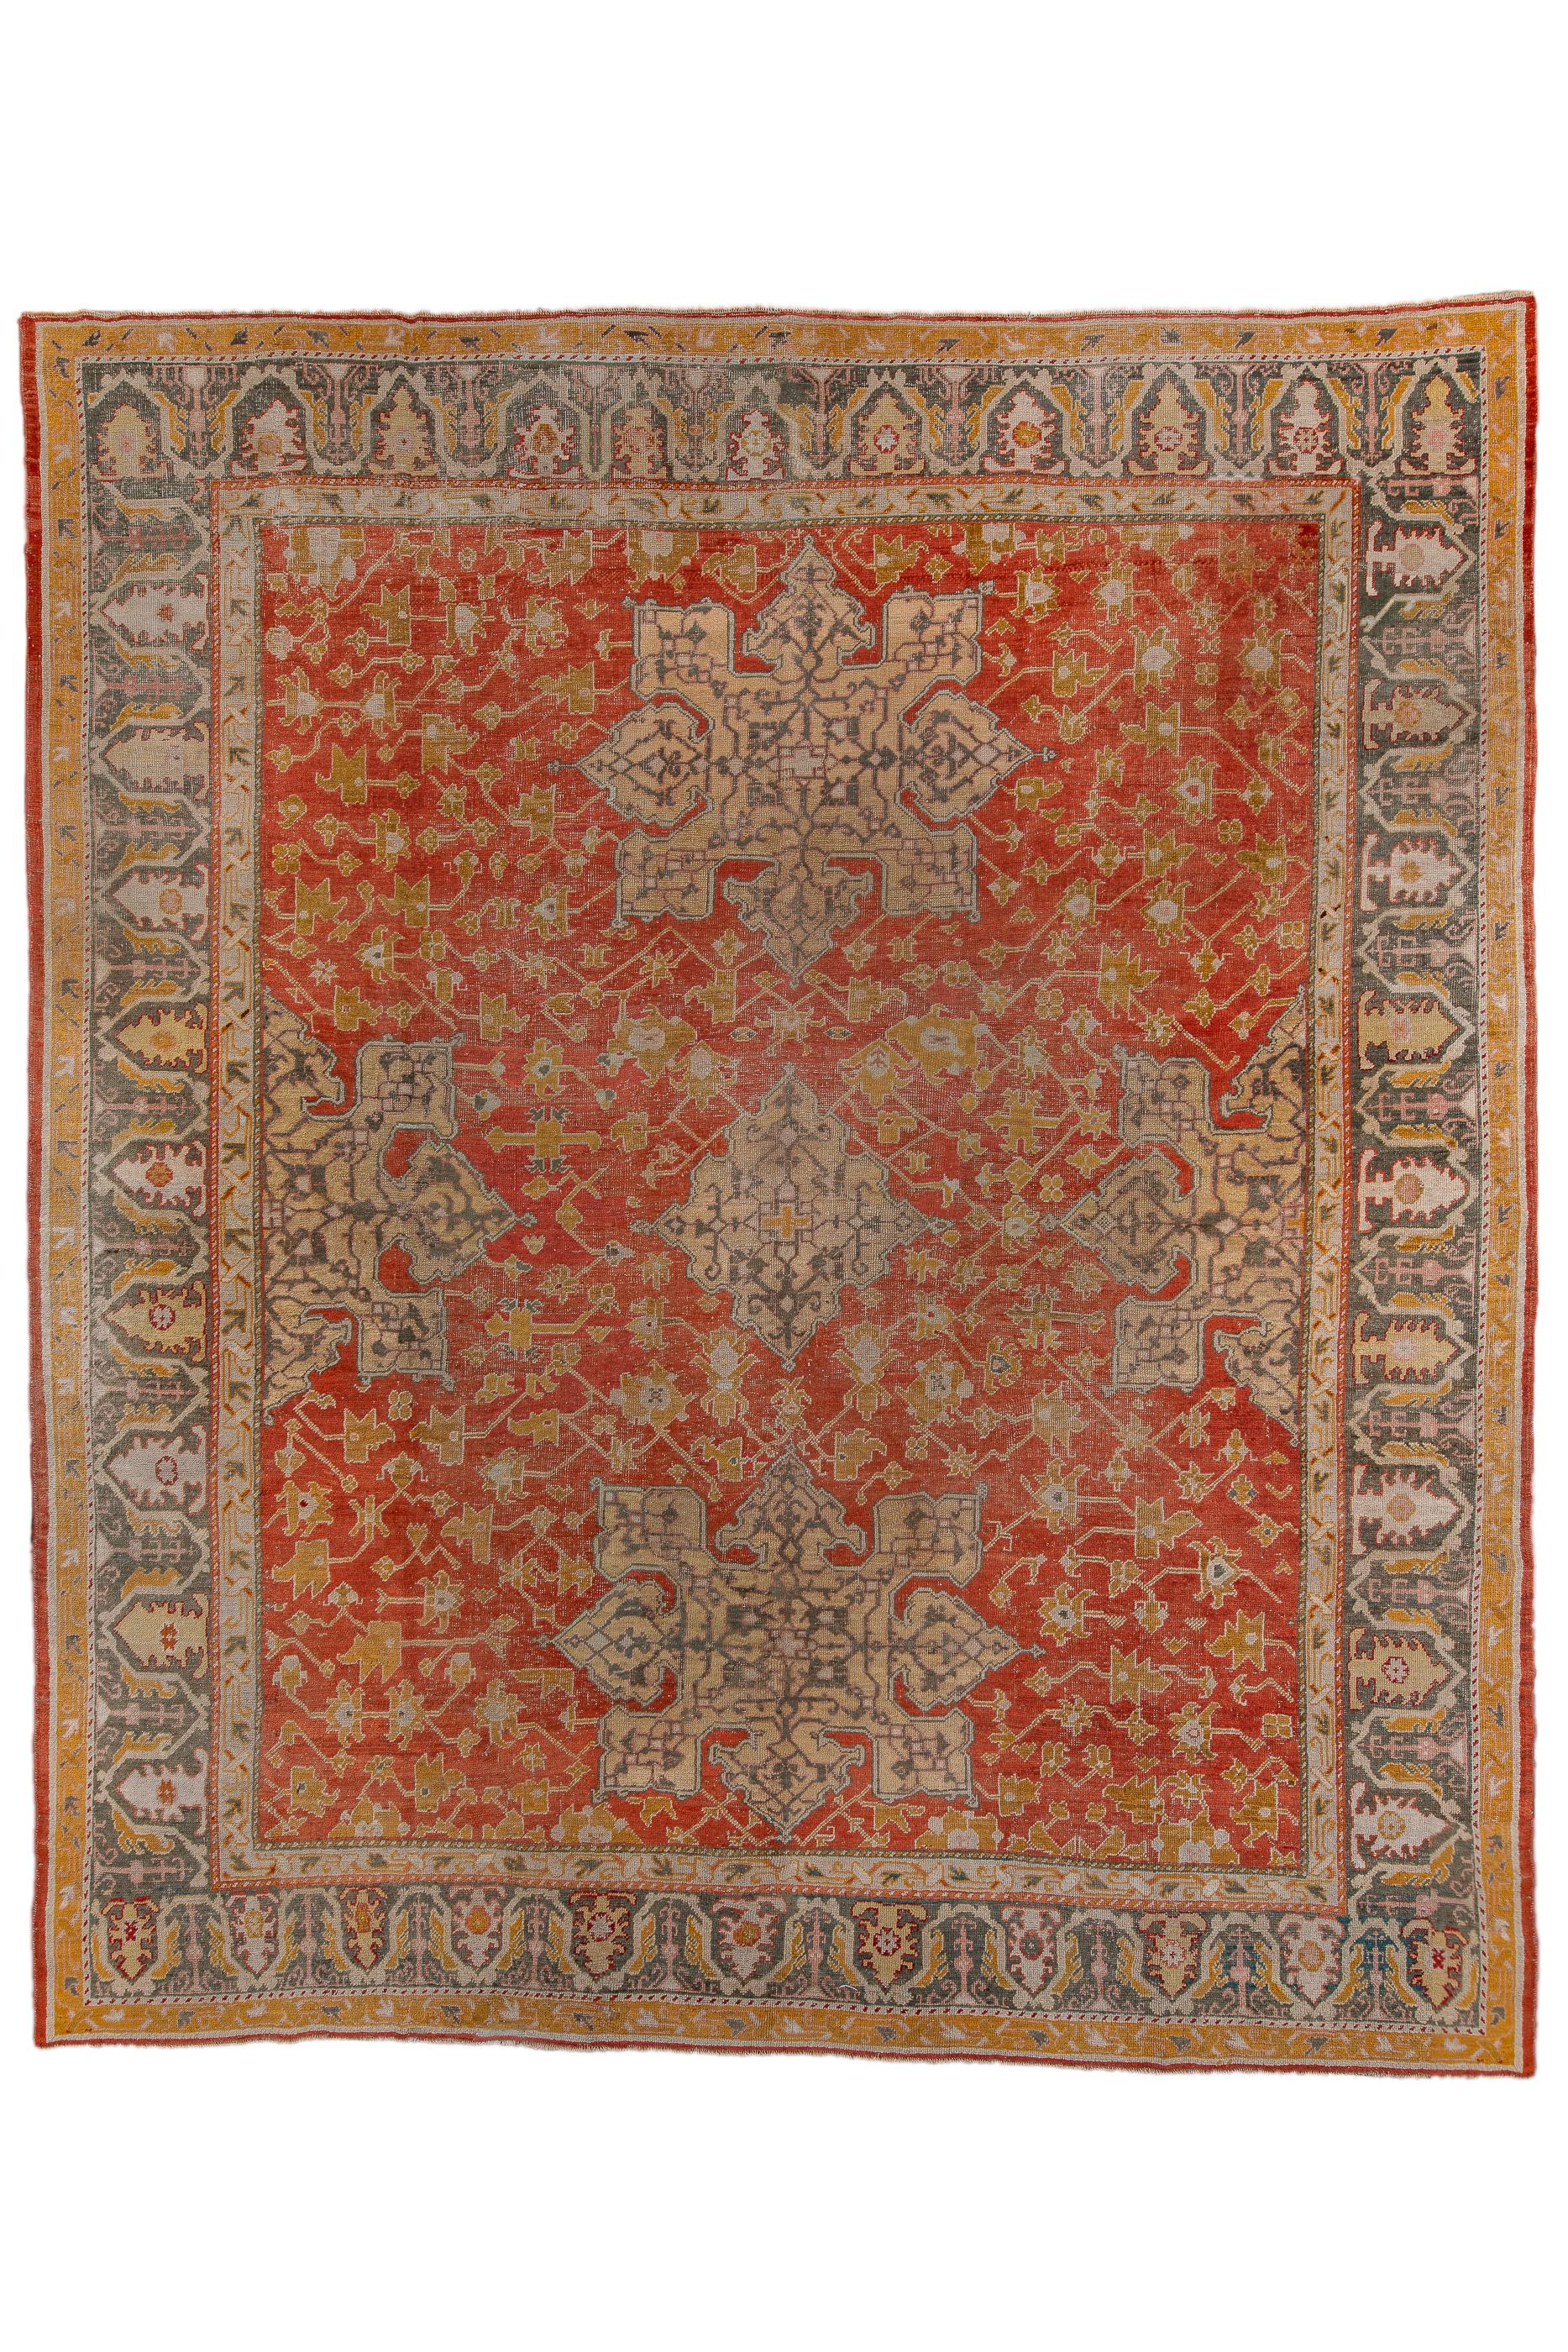 This town carpet is styled in a classic 16th century “Star” design of two complete vertical elements and two lateral half stars, on a Turkey red ground filled with small leafy palmettes and stiff vinery.  Sapphire blue main border with a barbed,